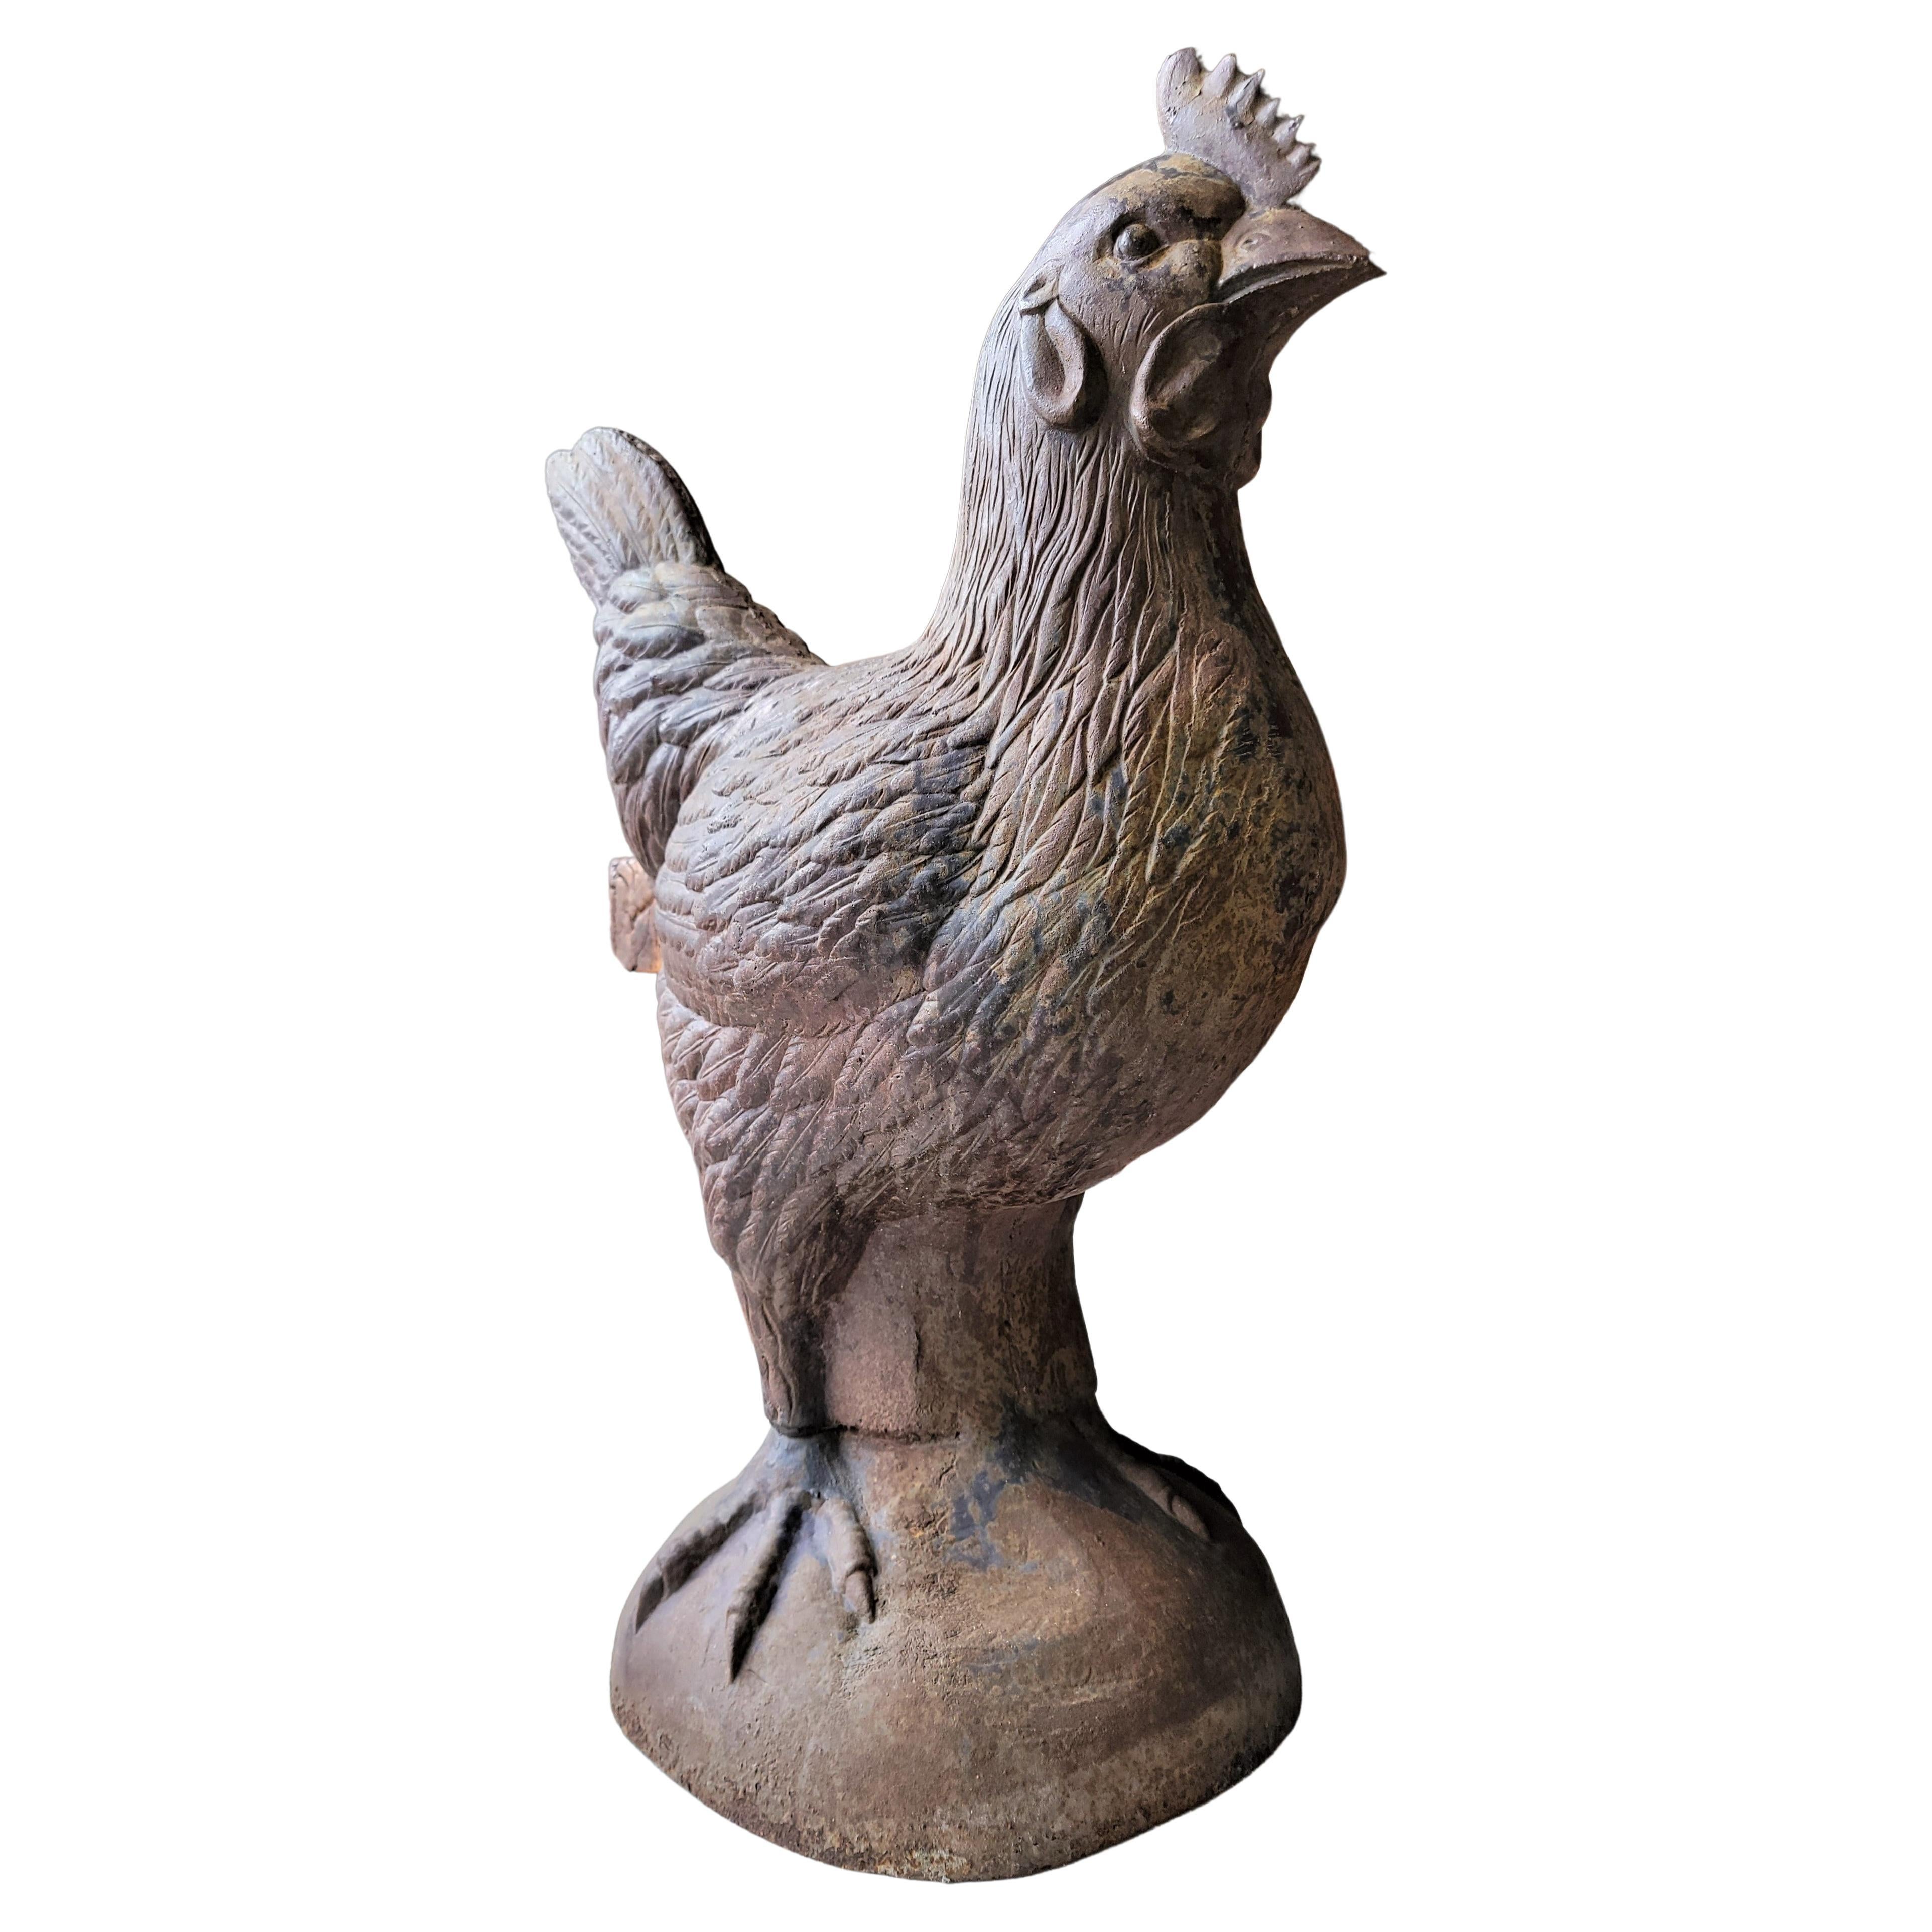 This fantastic monumental cast iron rooster is very large and heavy. It was probably used in a store front as a trade sign or a garden element. The patina is amazing and in very good condition.